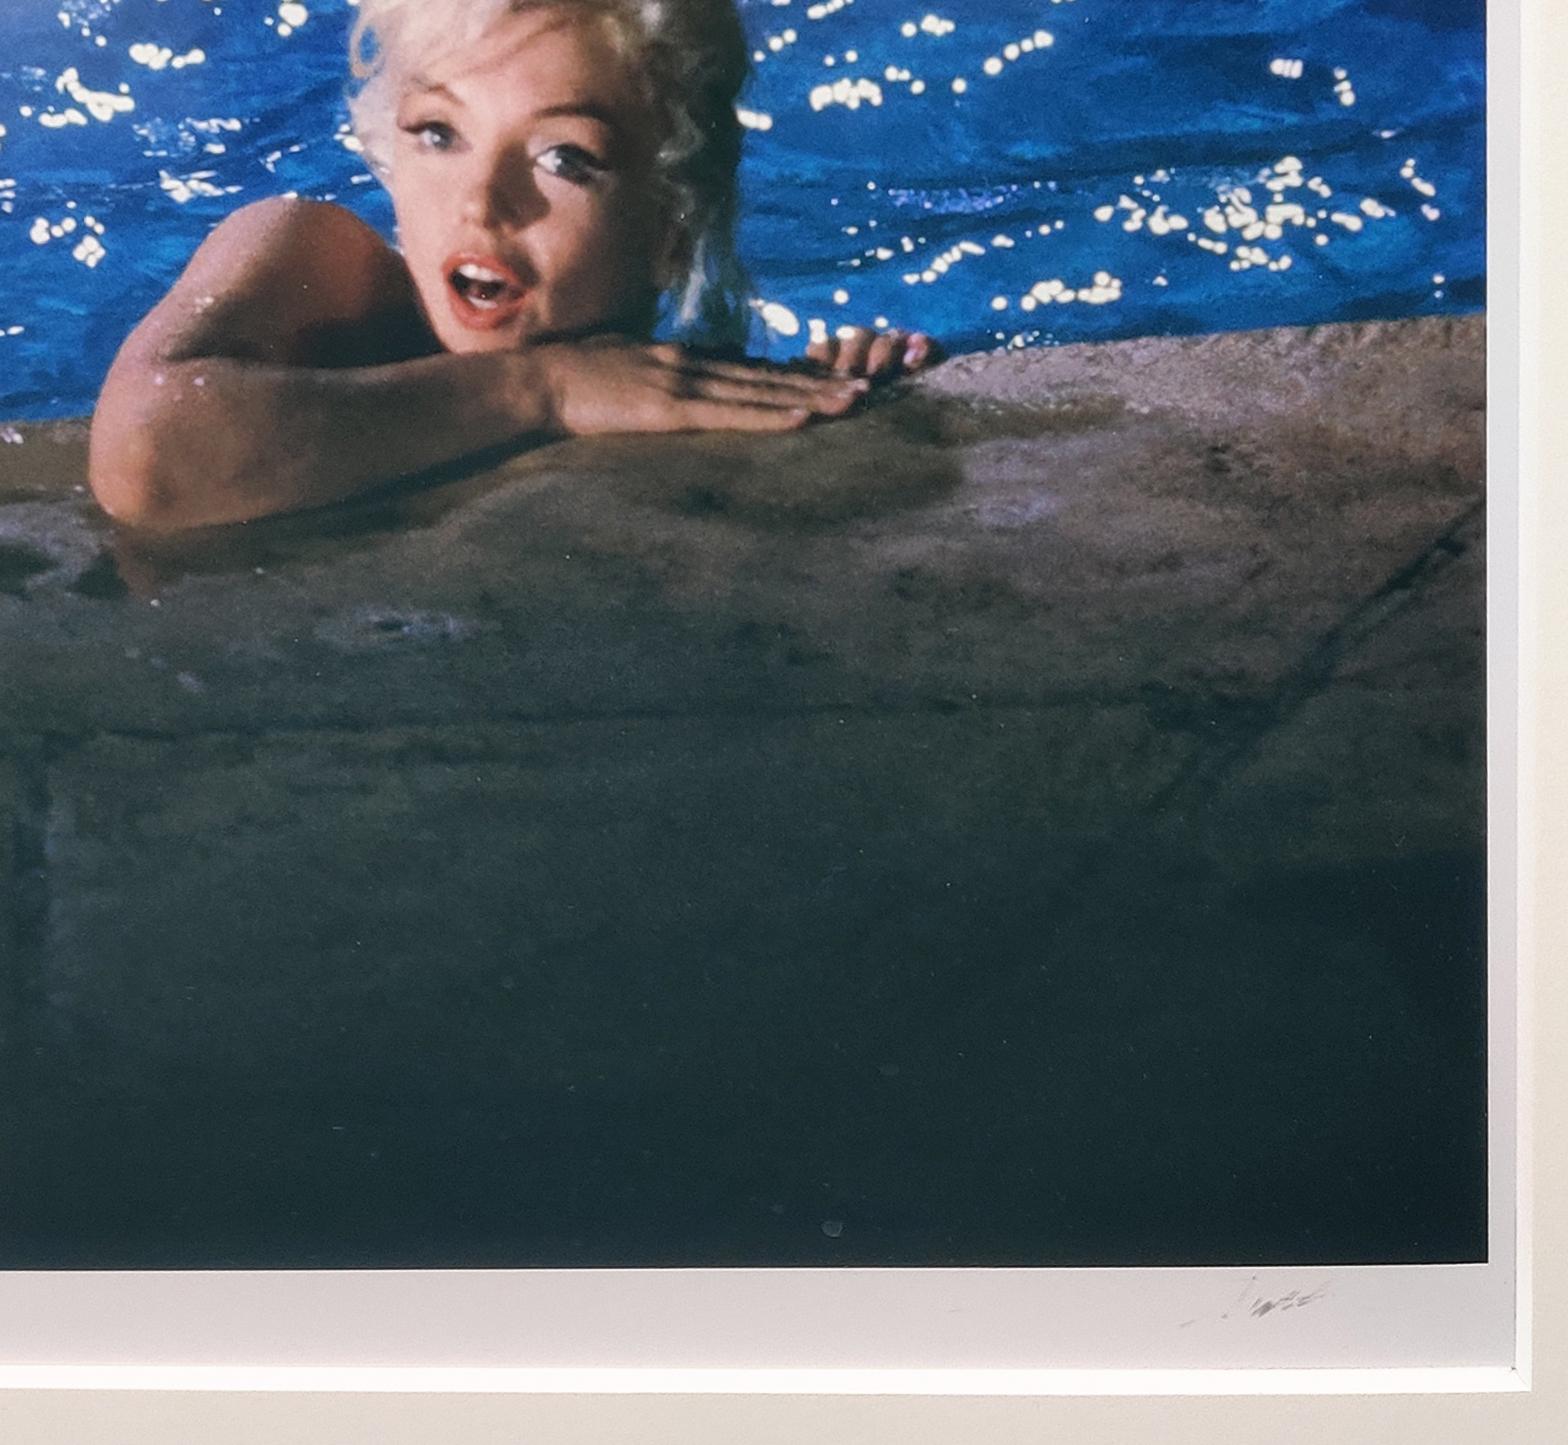 MARILYN MONROE, COLOR 2, FRAME 21 - Photograph by Lawrence Schiller